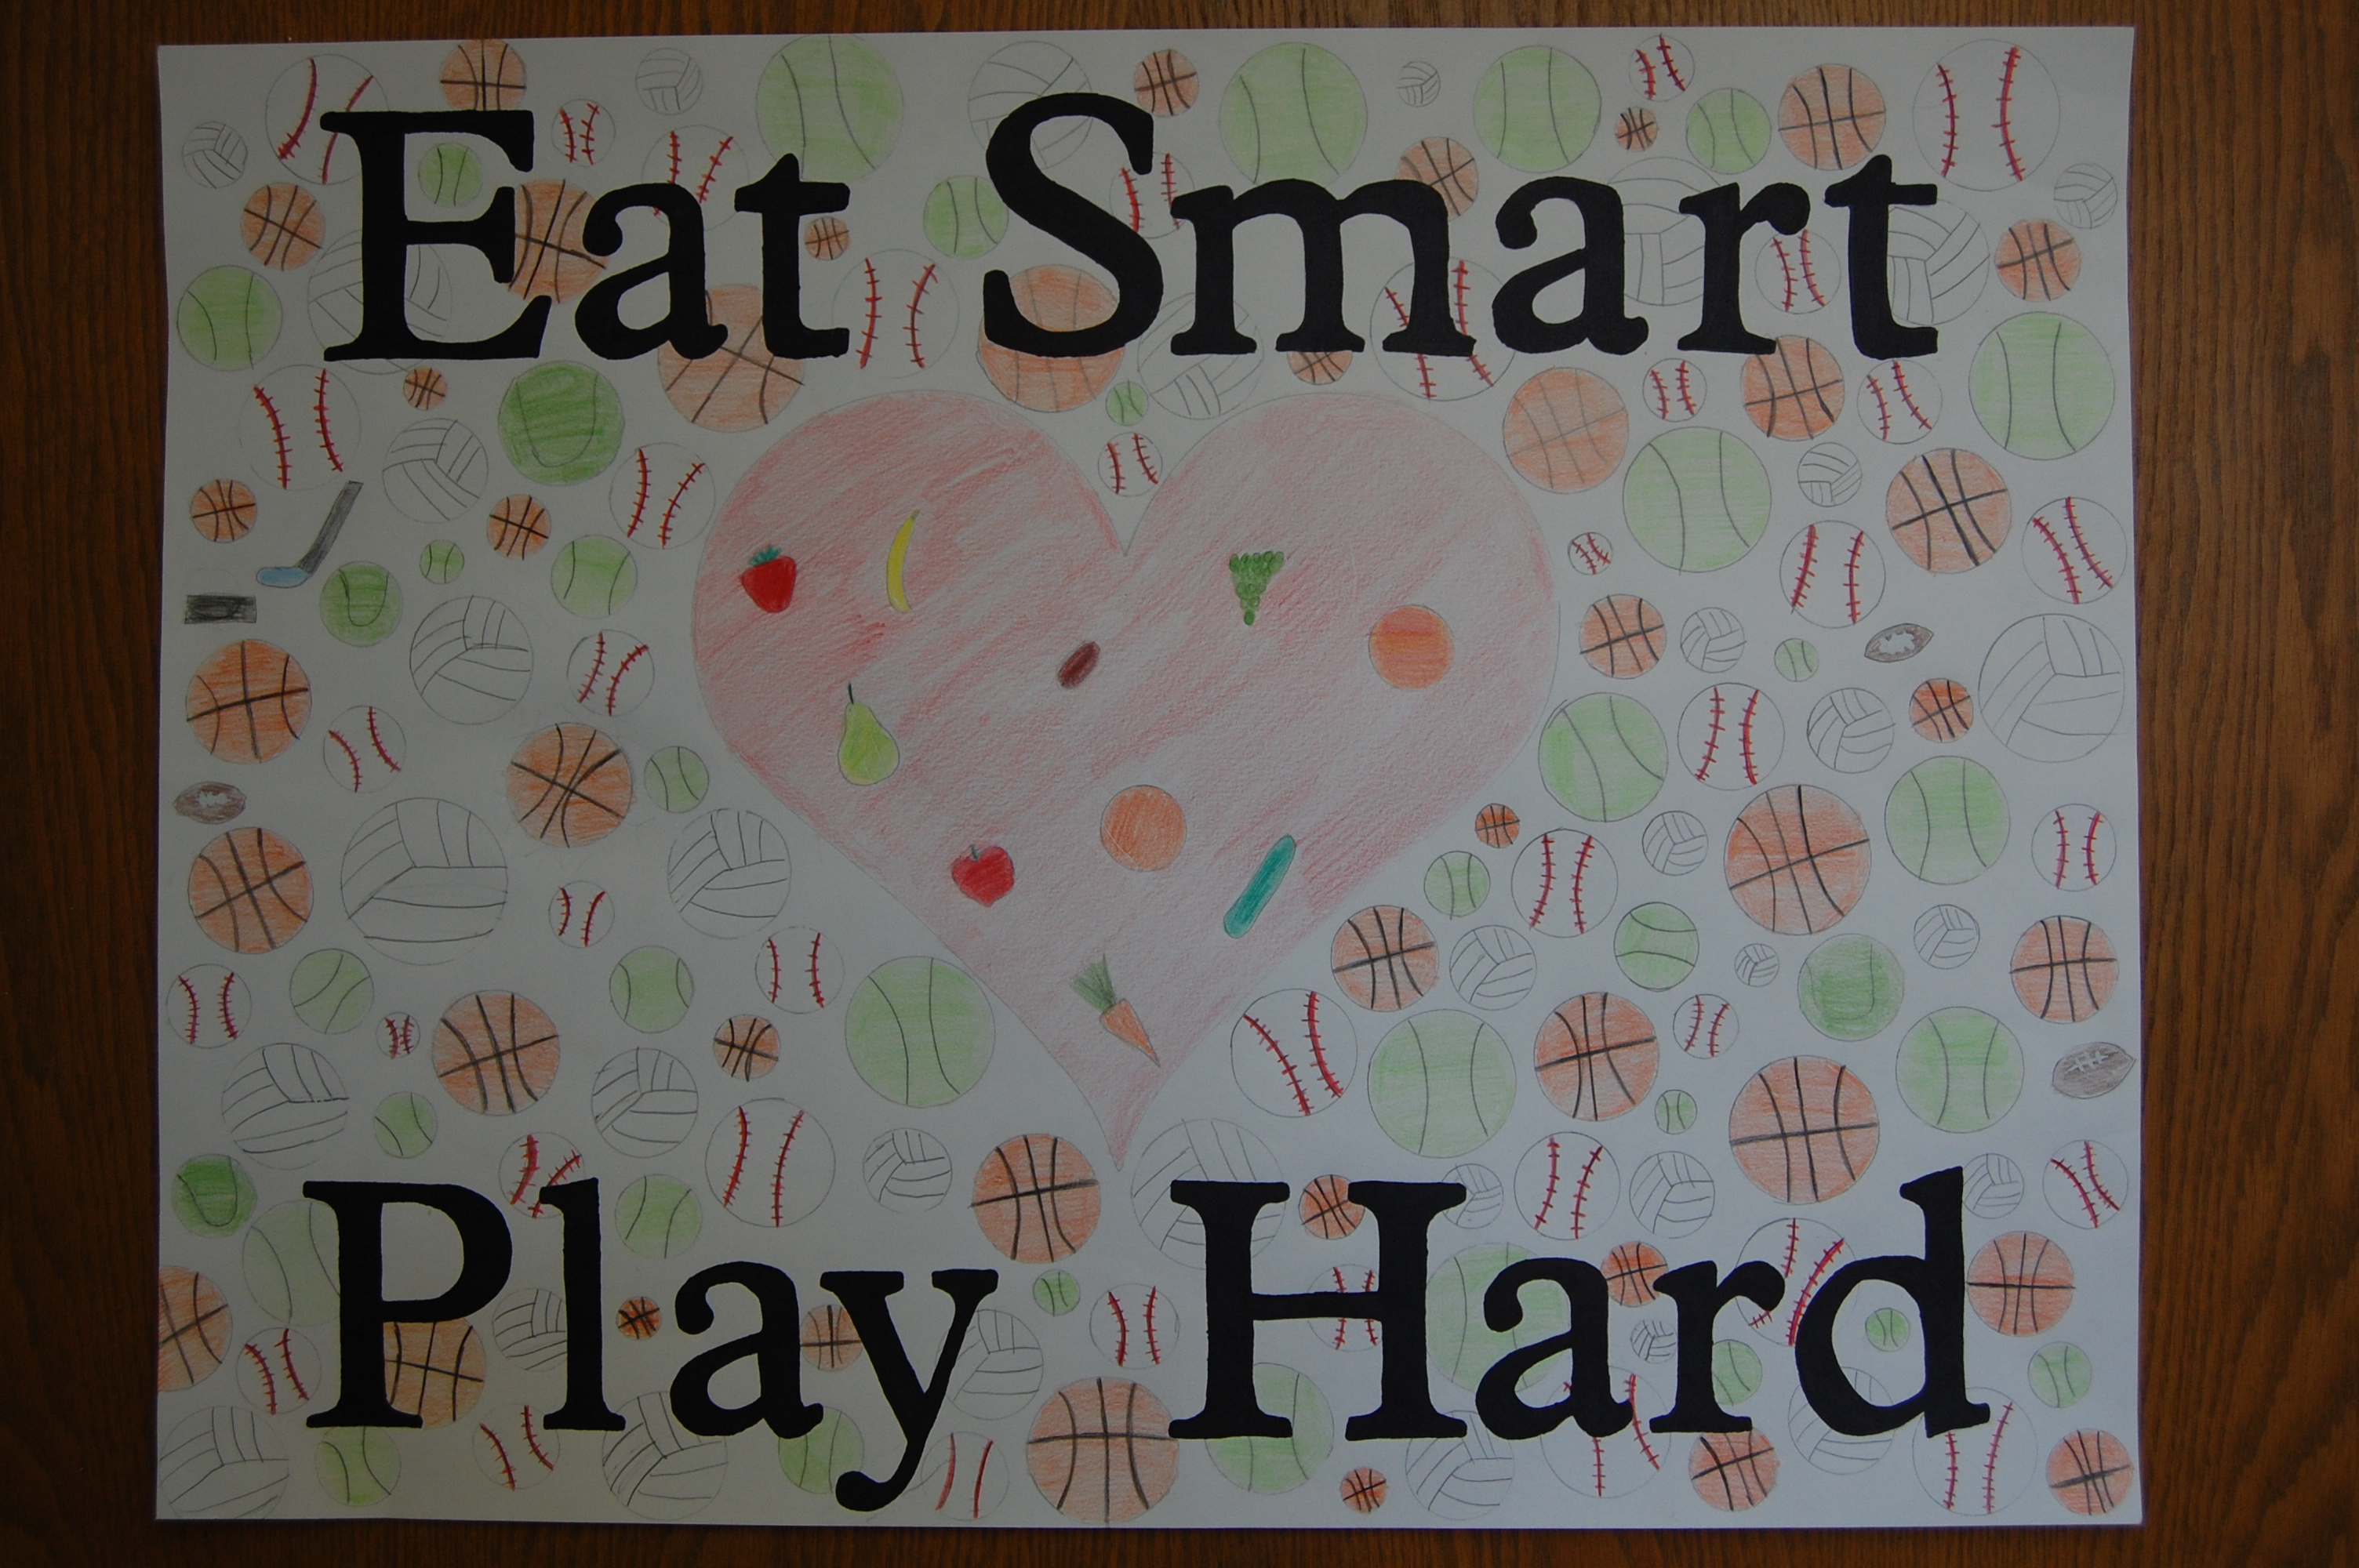 This entry won Casondra Rutschke of Zeeland second place in the preteen division of the ""Eat Smart. Play Hard."" poster contest.